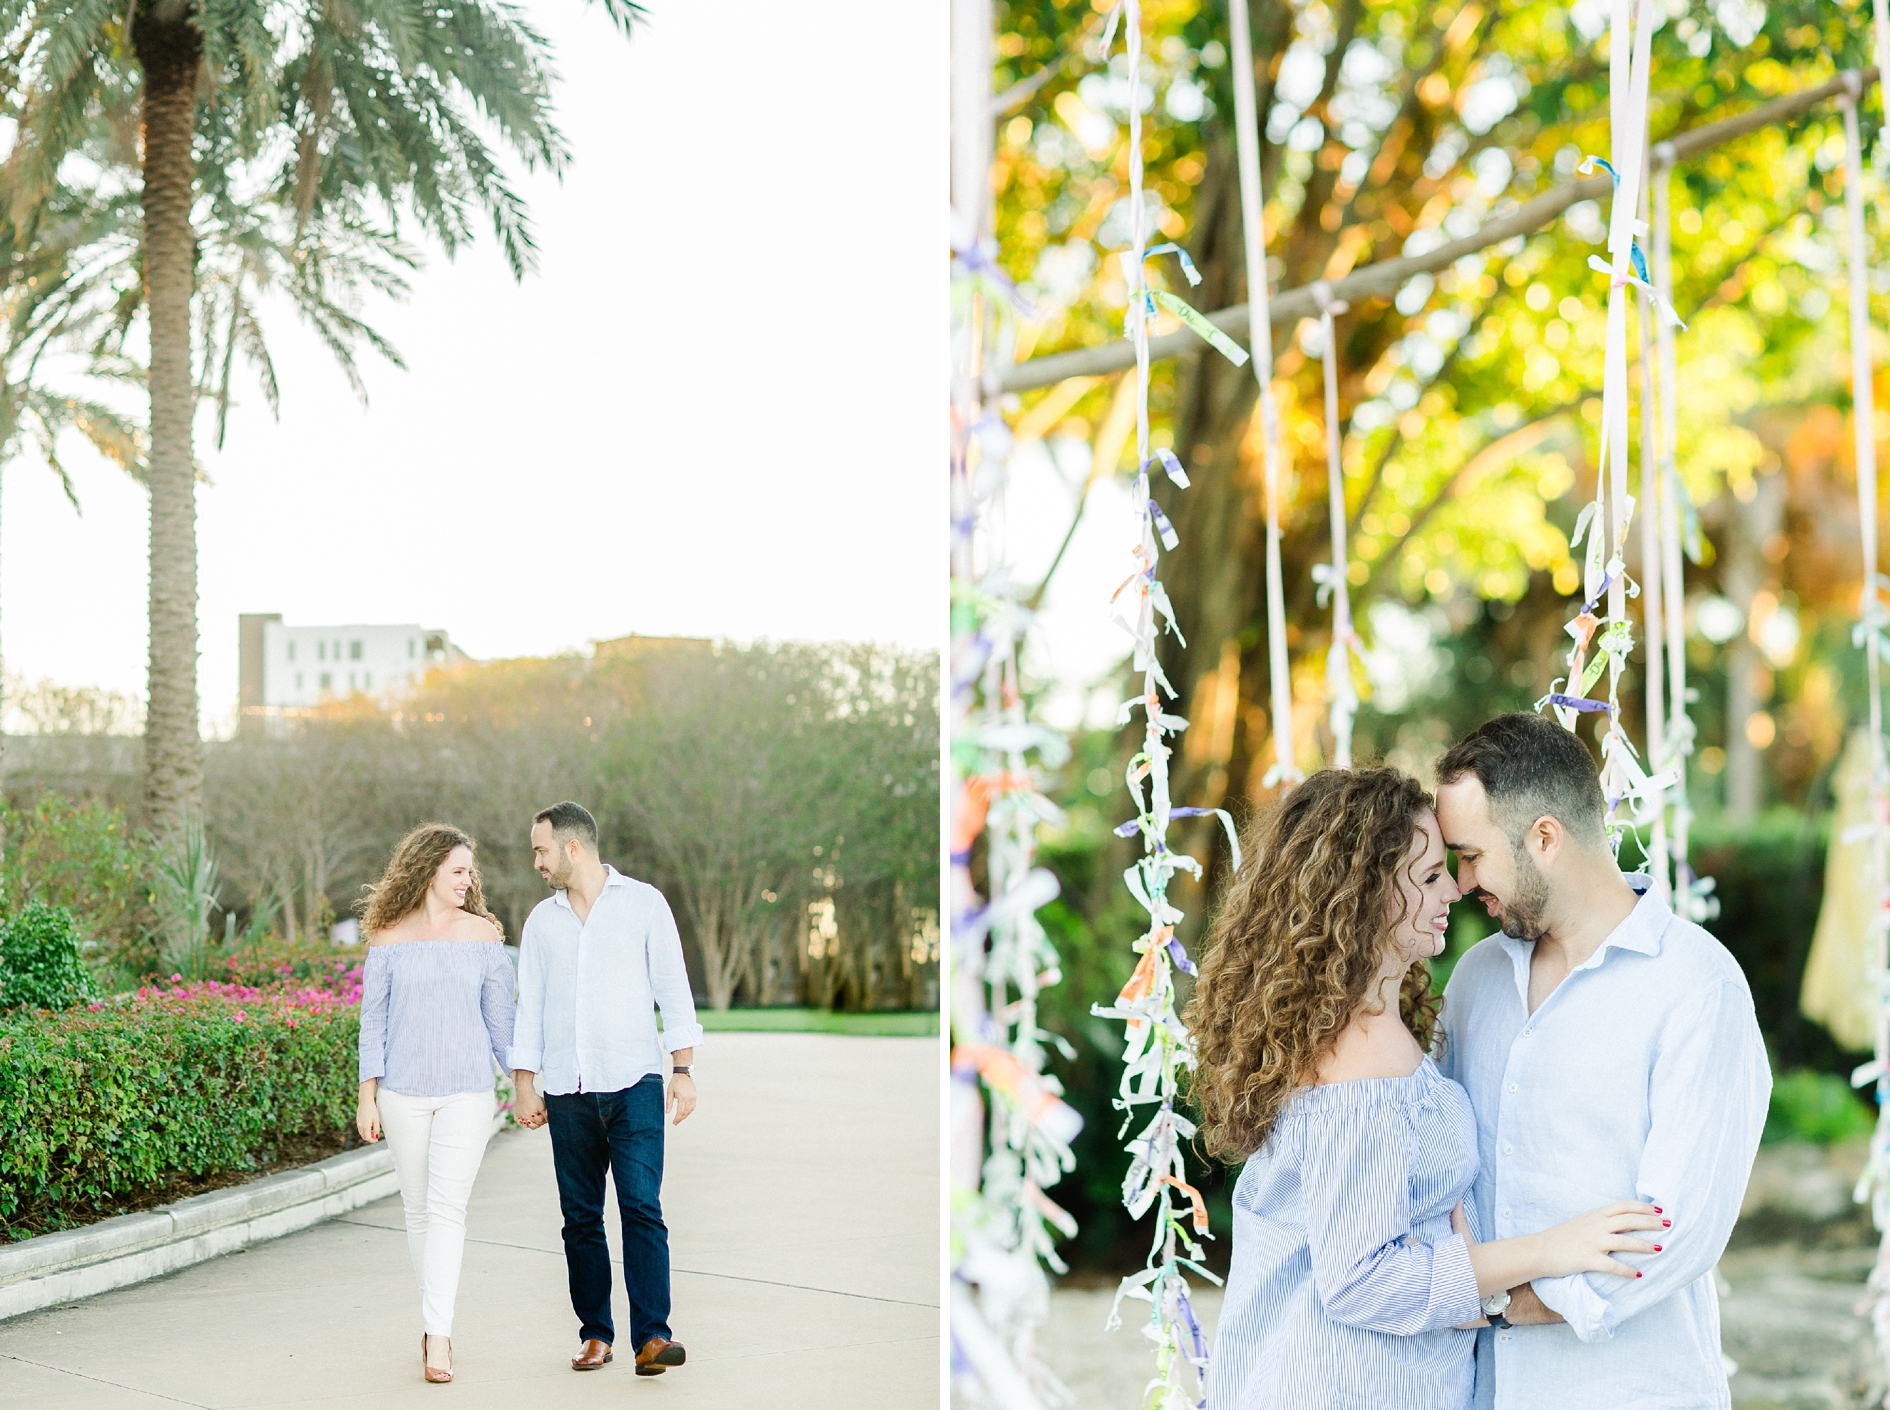 Straub Park Engagement | @ Ailyn La Torre Photography 2017